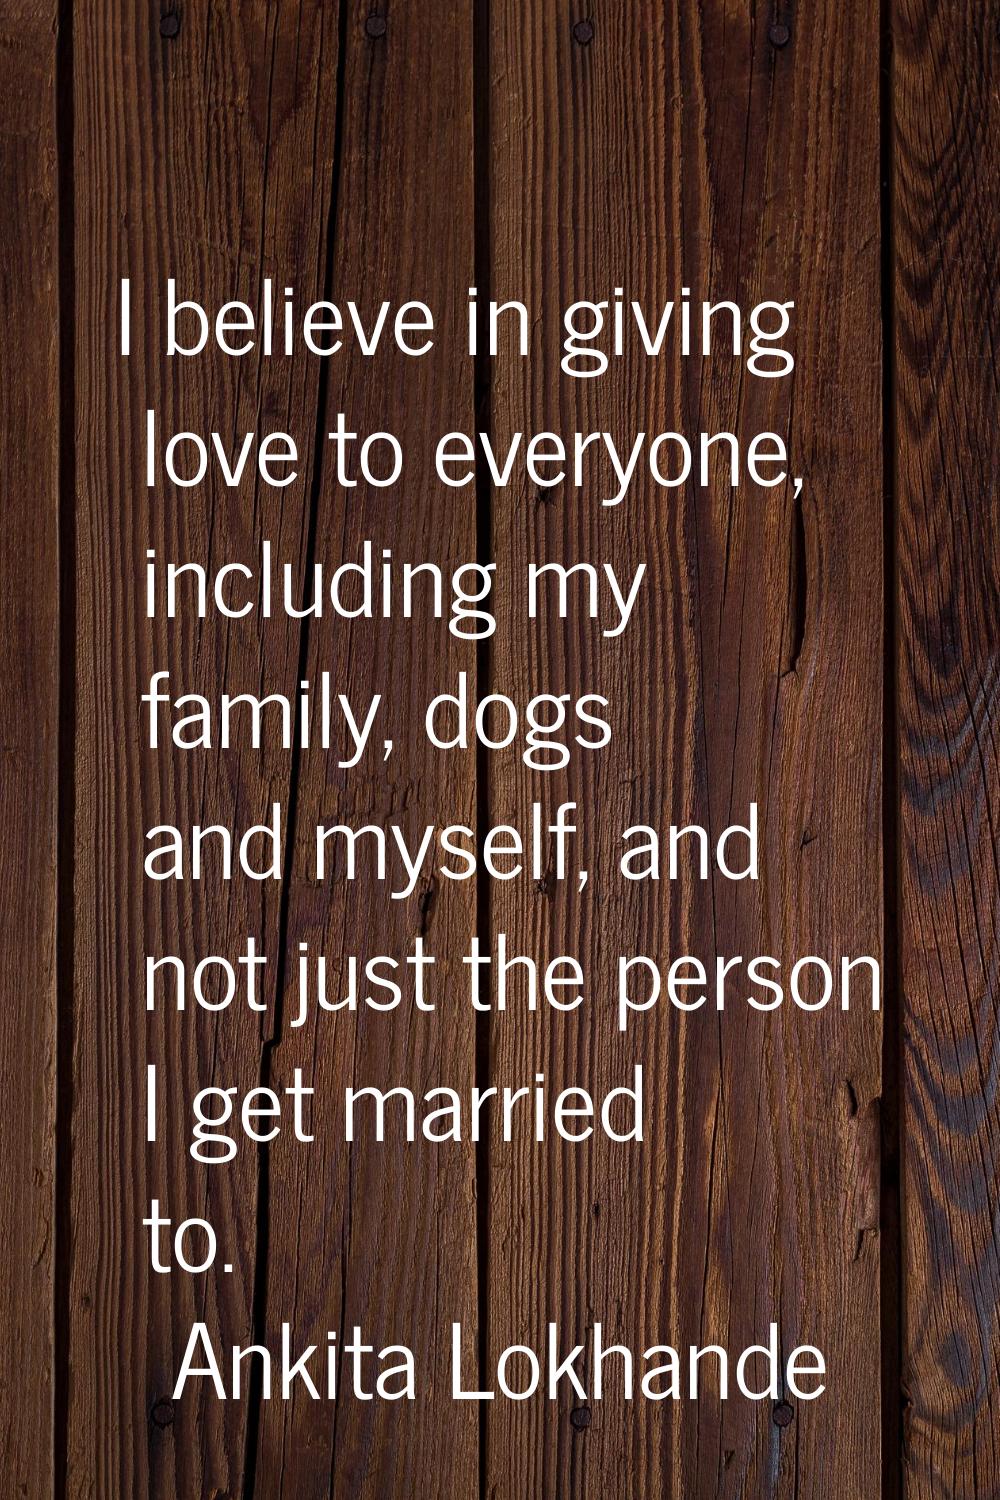 I believe in giving love to everyone, including my family, dogs and myself, and not just the person